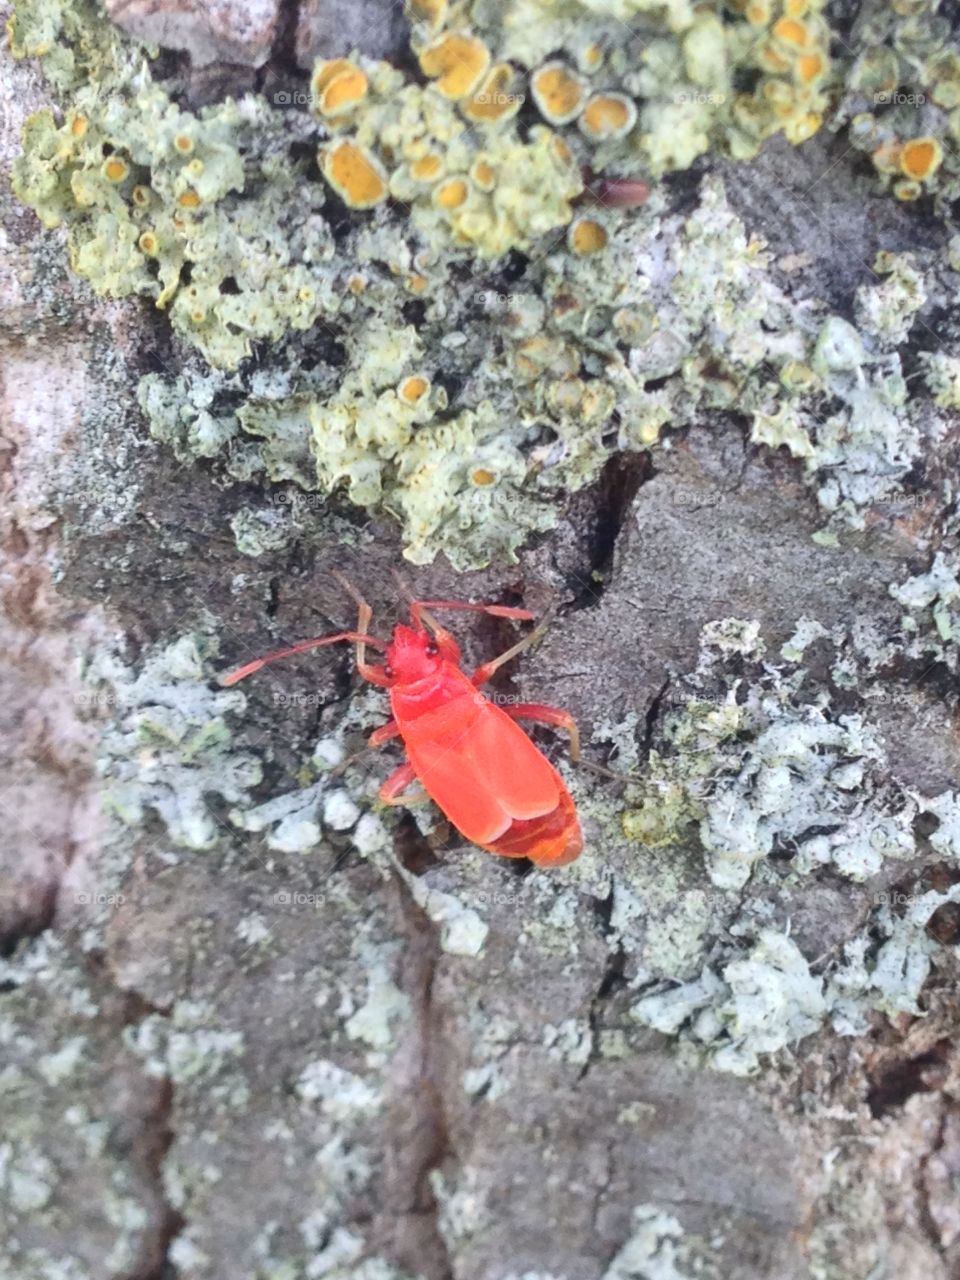 Small red beetle on rock with lichen